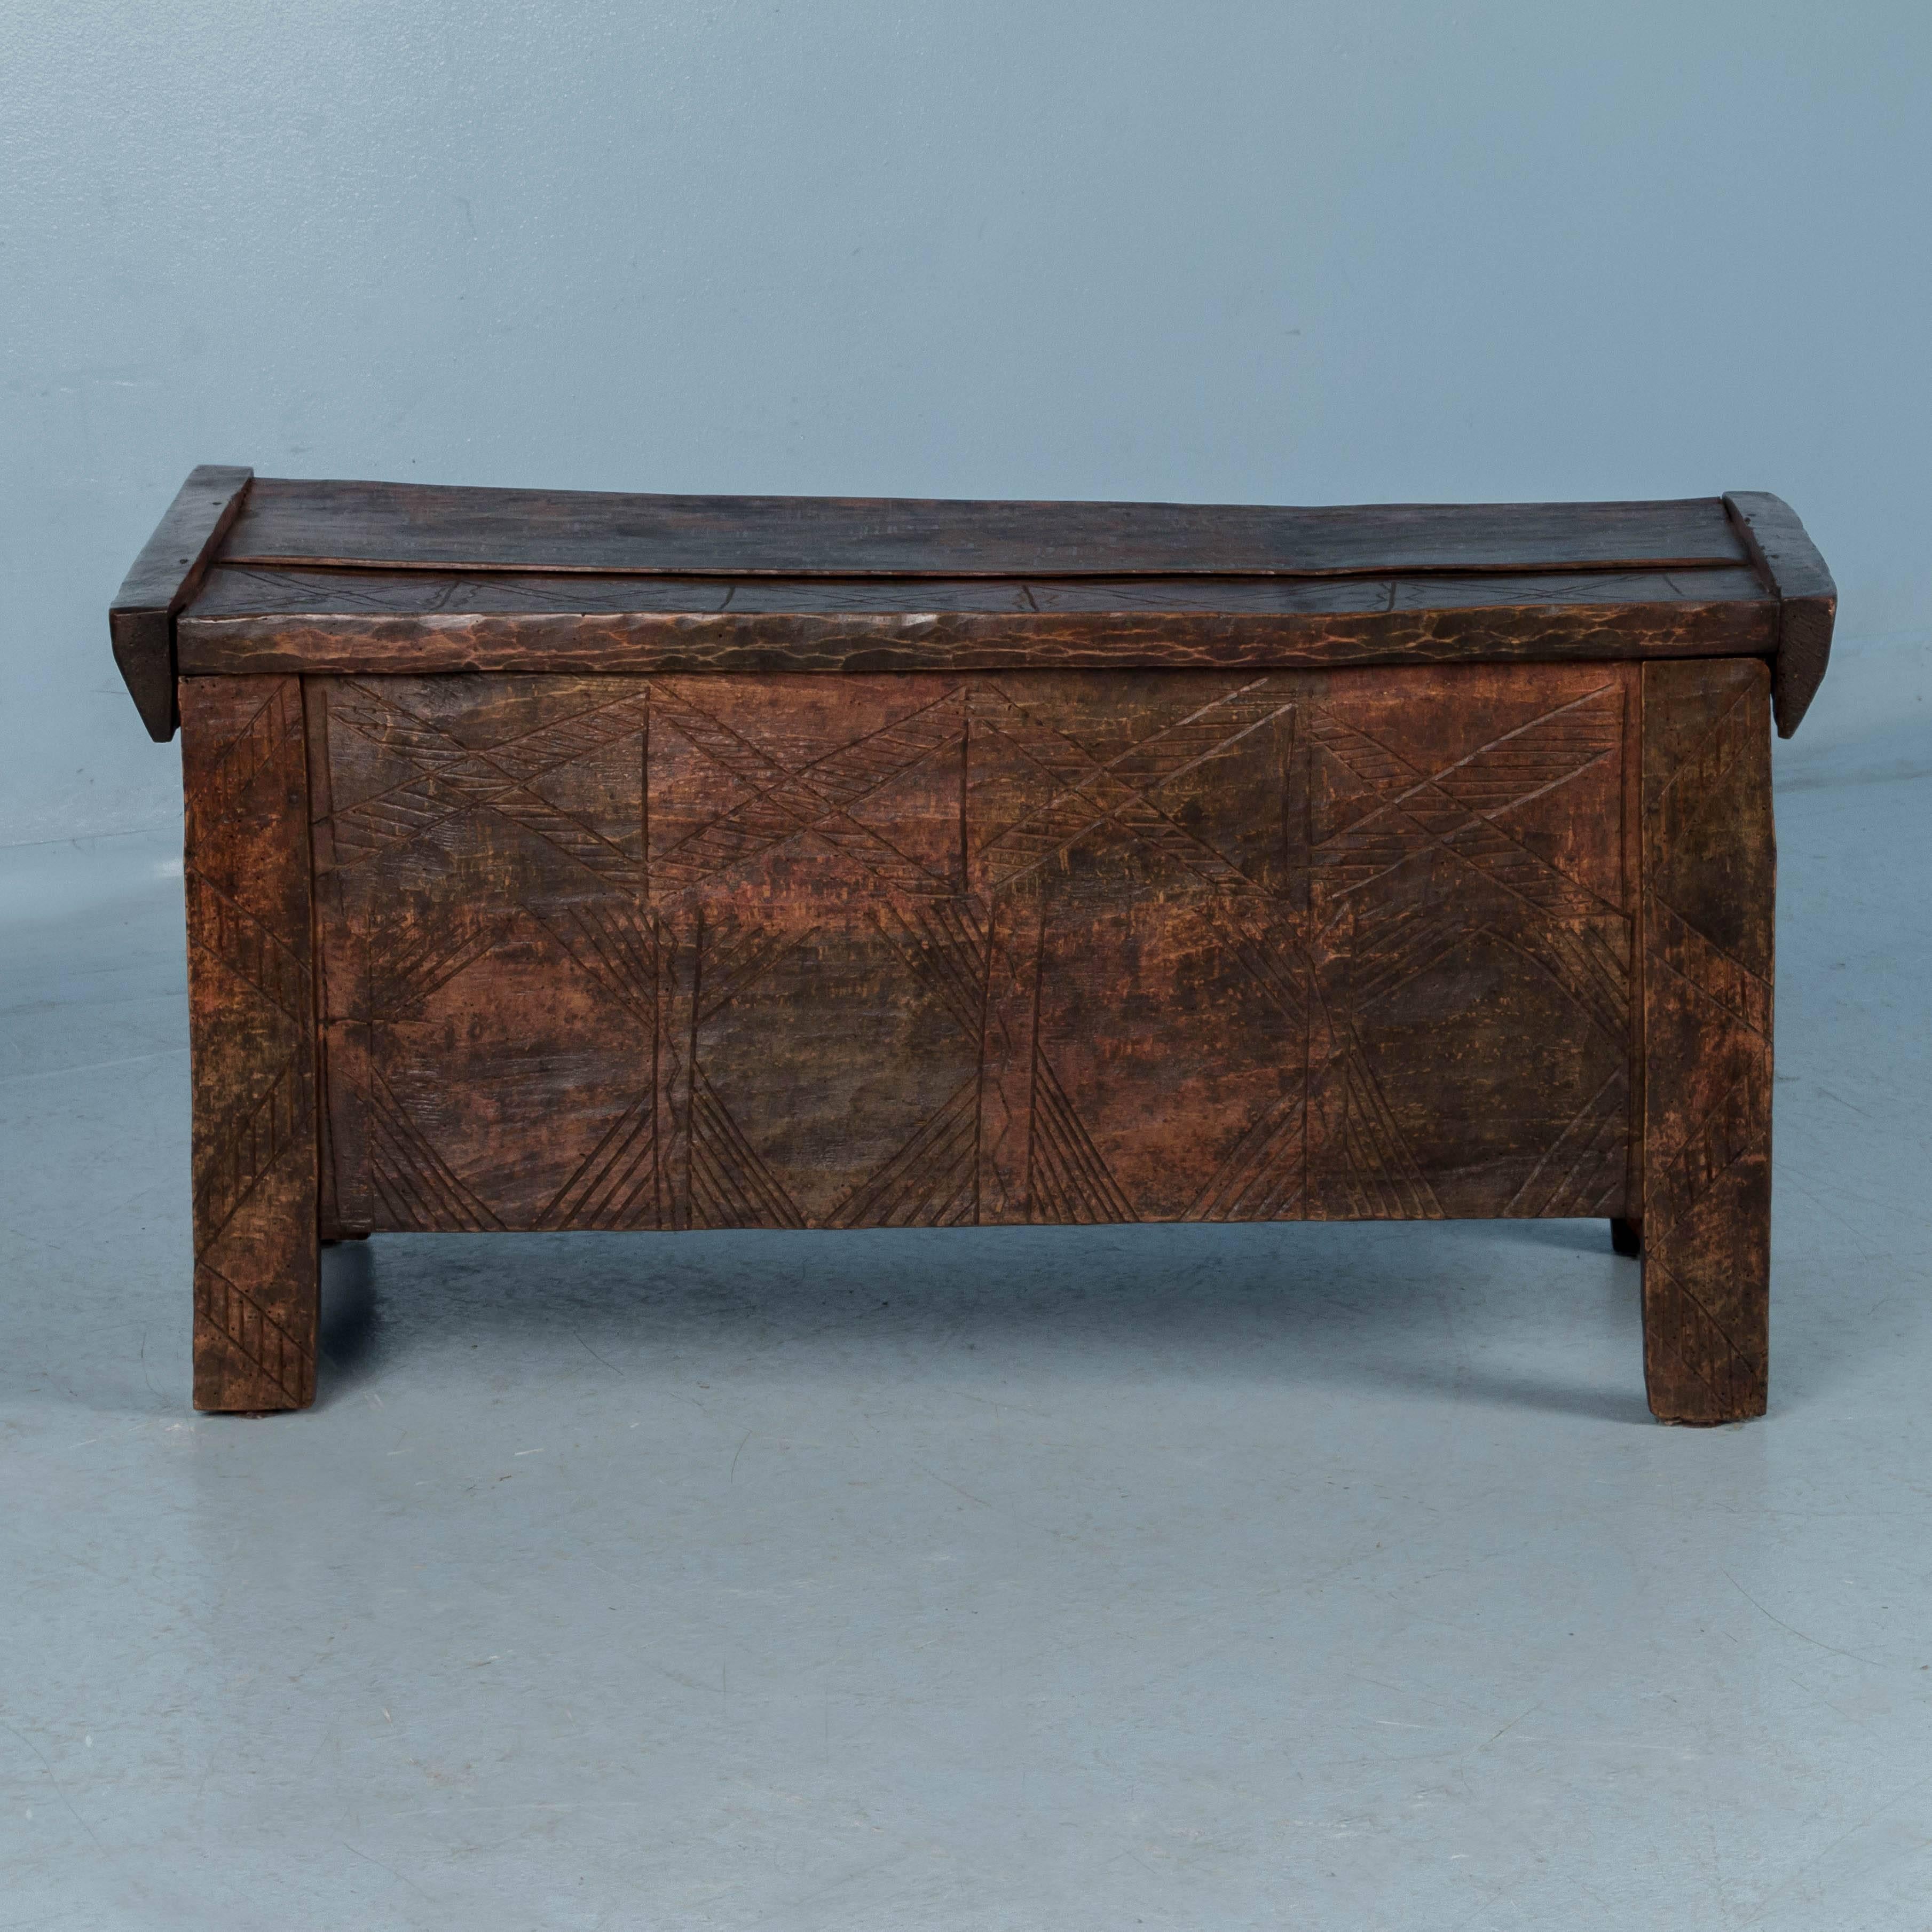 The top and front of this interesting trunk are carved with geometric cross hatch patterns, appearing etched into the wood and adding to the rustic, country feel. The chest has a slightly domed hinged top, which opens to a generous storage space